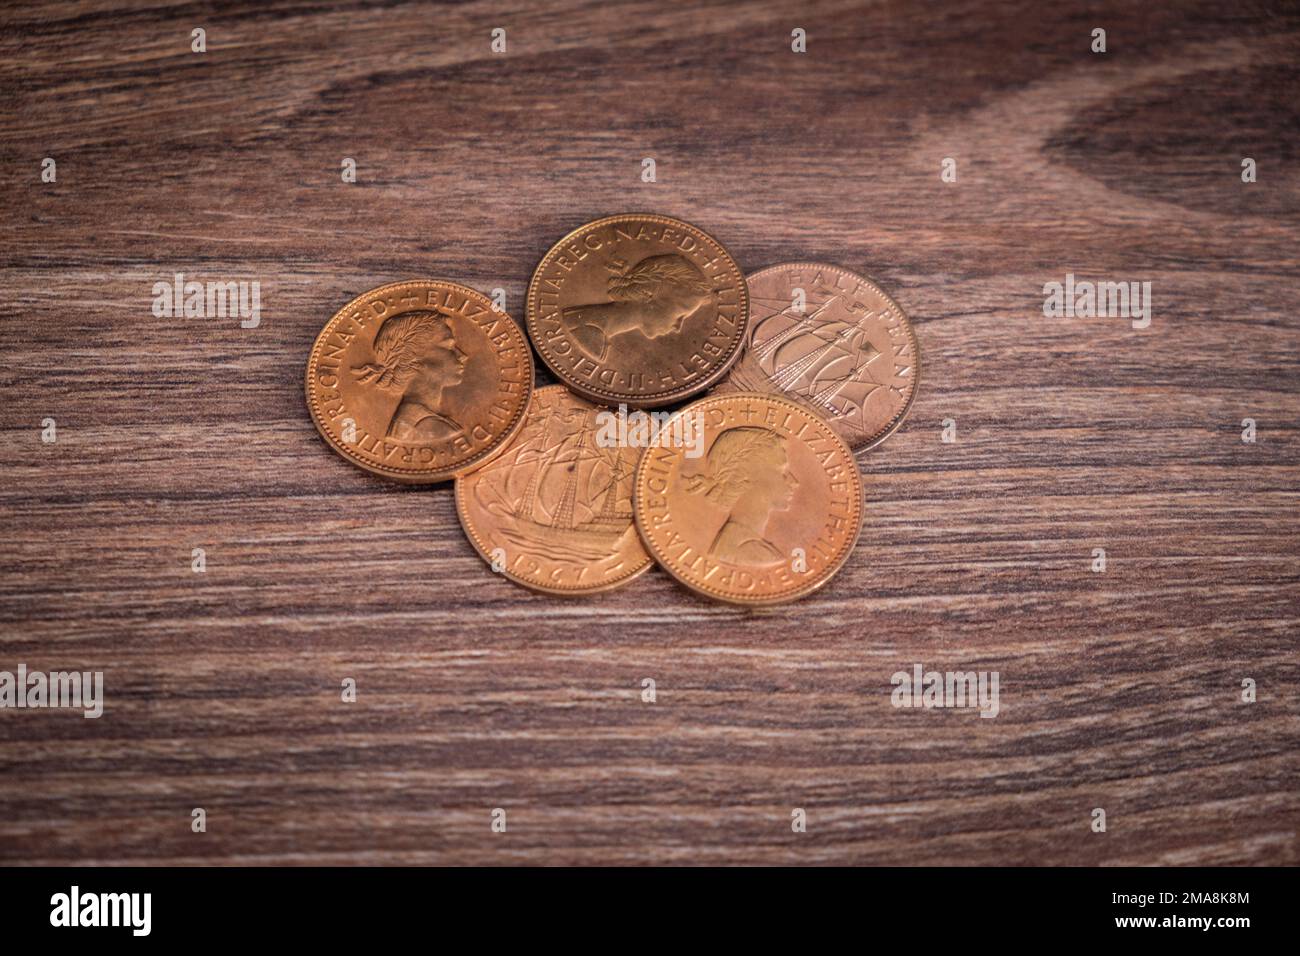 Vintage looking Range of British half penny coins (UK currency) Stock Photo